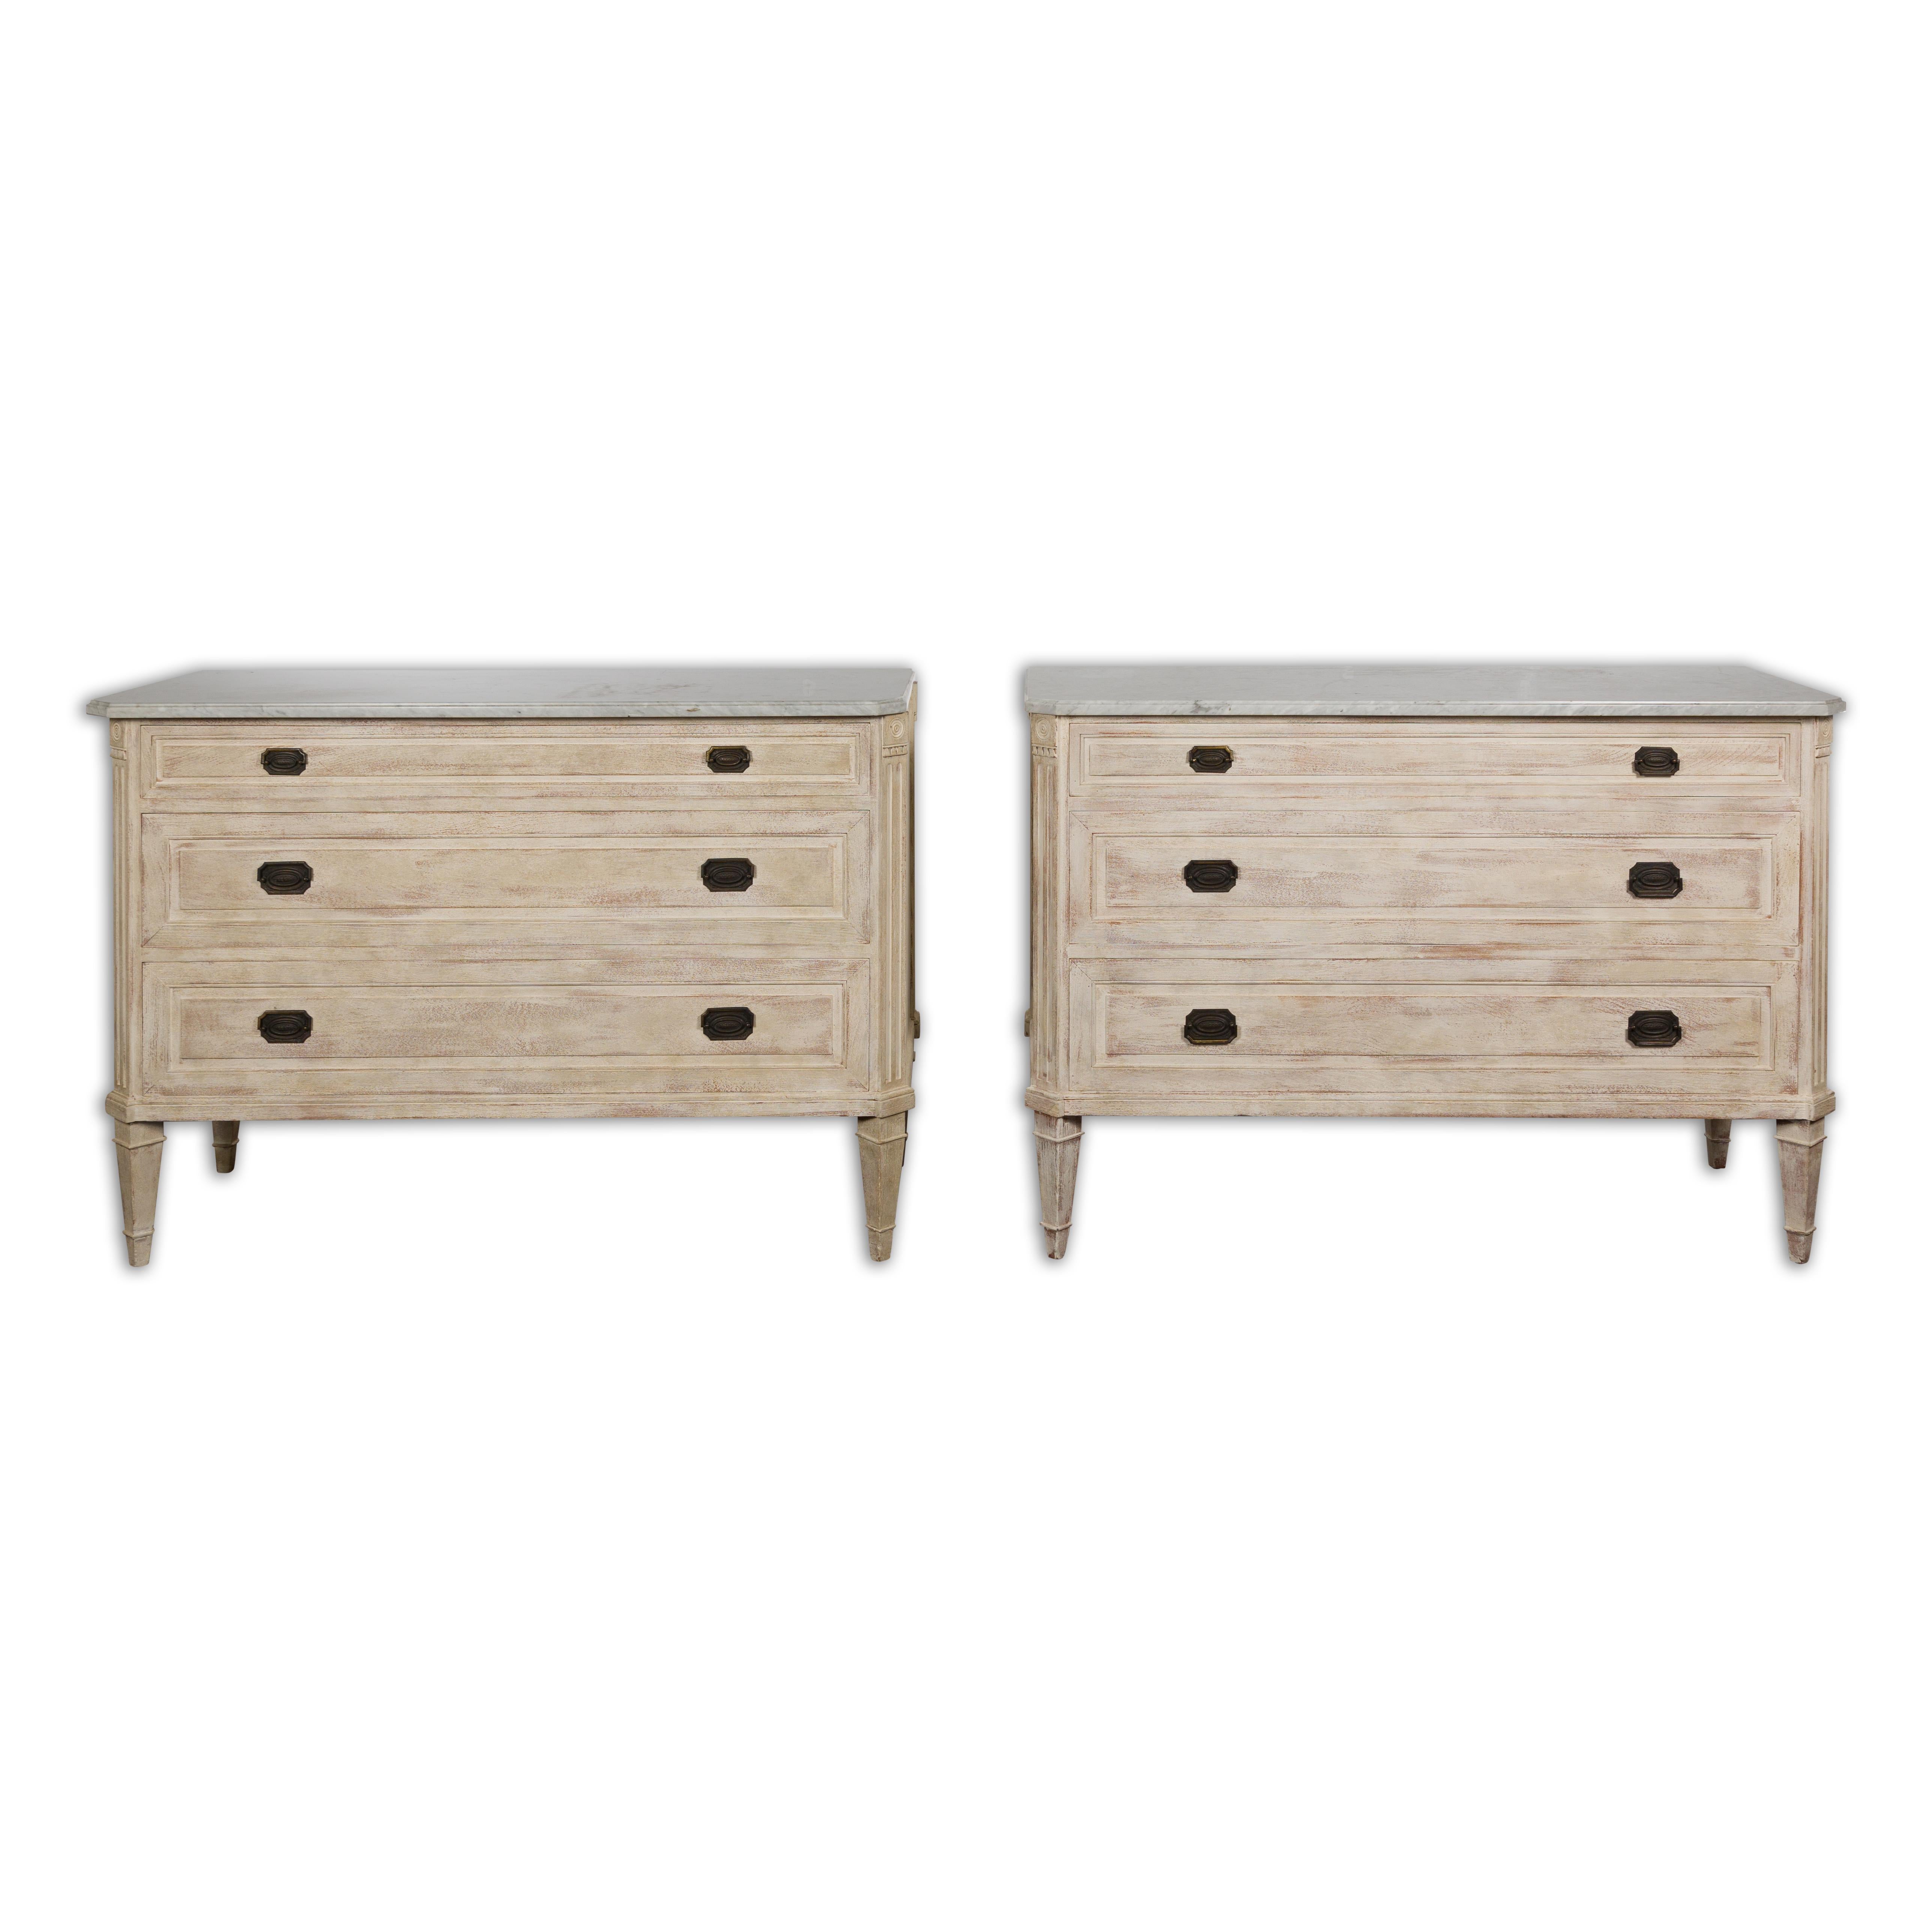 A pair of French Neoclassical style painted wood three-drawer chests from circa 1930 with light grey marble tops, graduated drawers, carved fluted side posts and tapered legs. Elevate your living space with this captivating pair of French